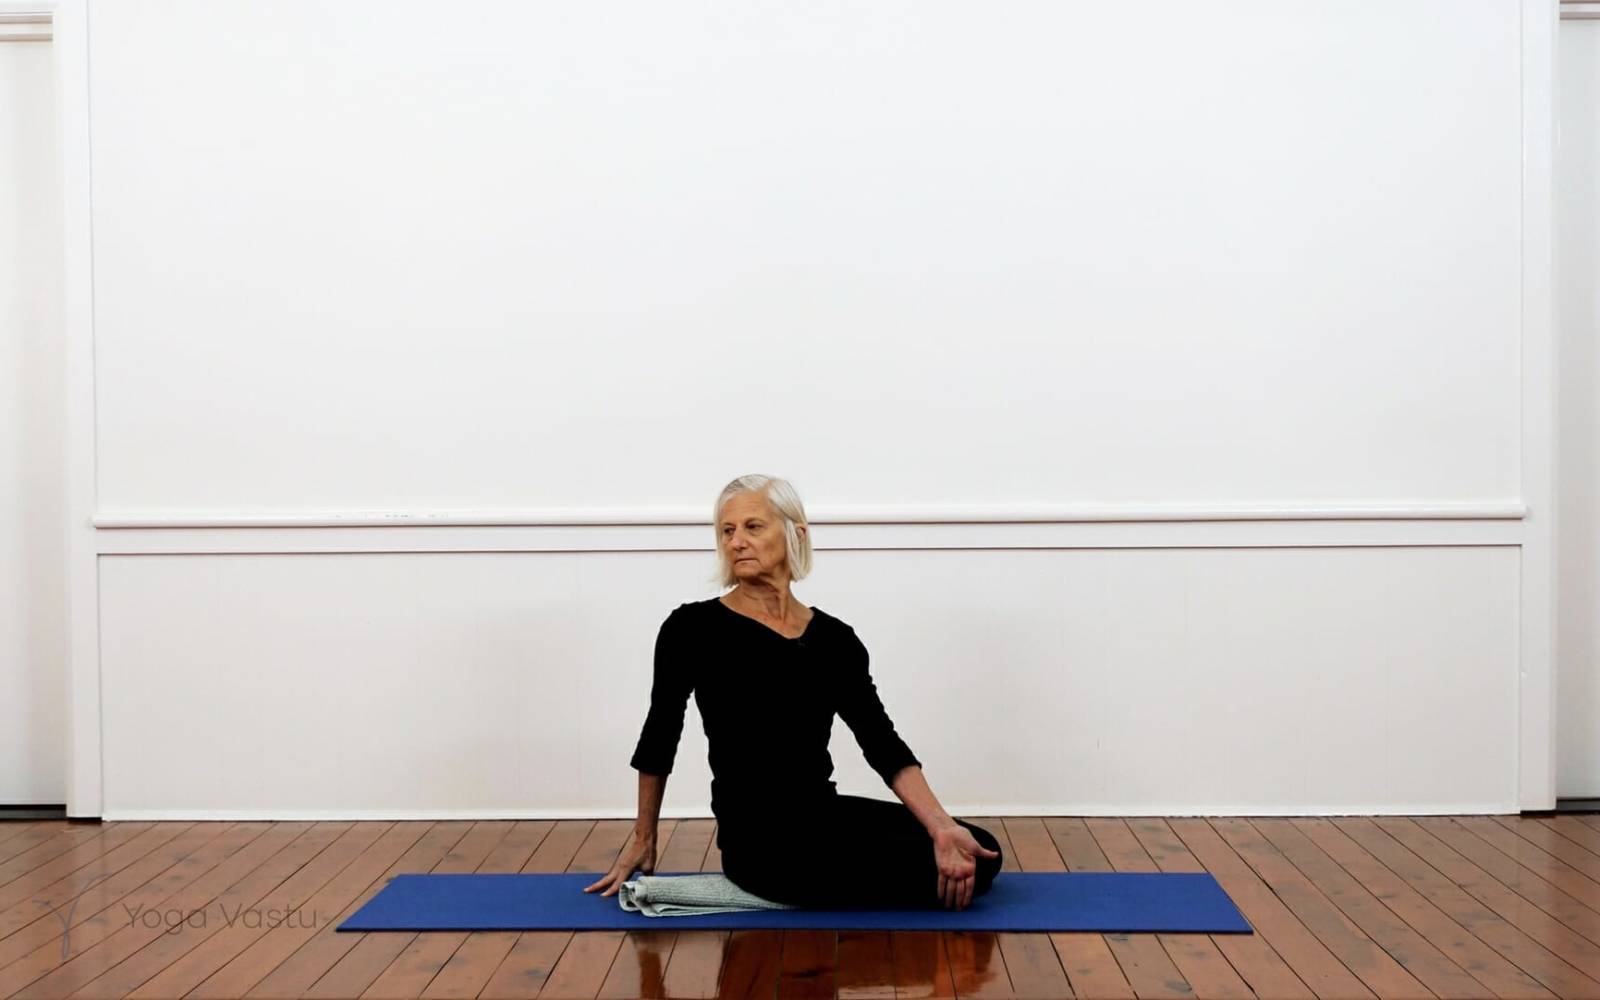 Tummee.com - Iyengar Yoga For Senior Citizens: Beginner Level Iyengar Yoga  For Senior Citizens With Props View the sequence at   The old belief  that 'yoga is for the young and the